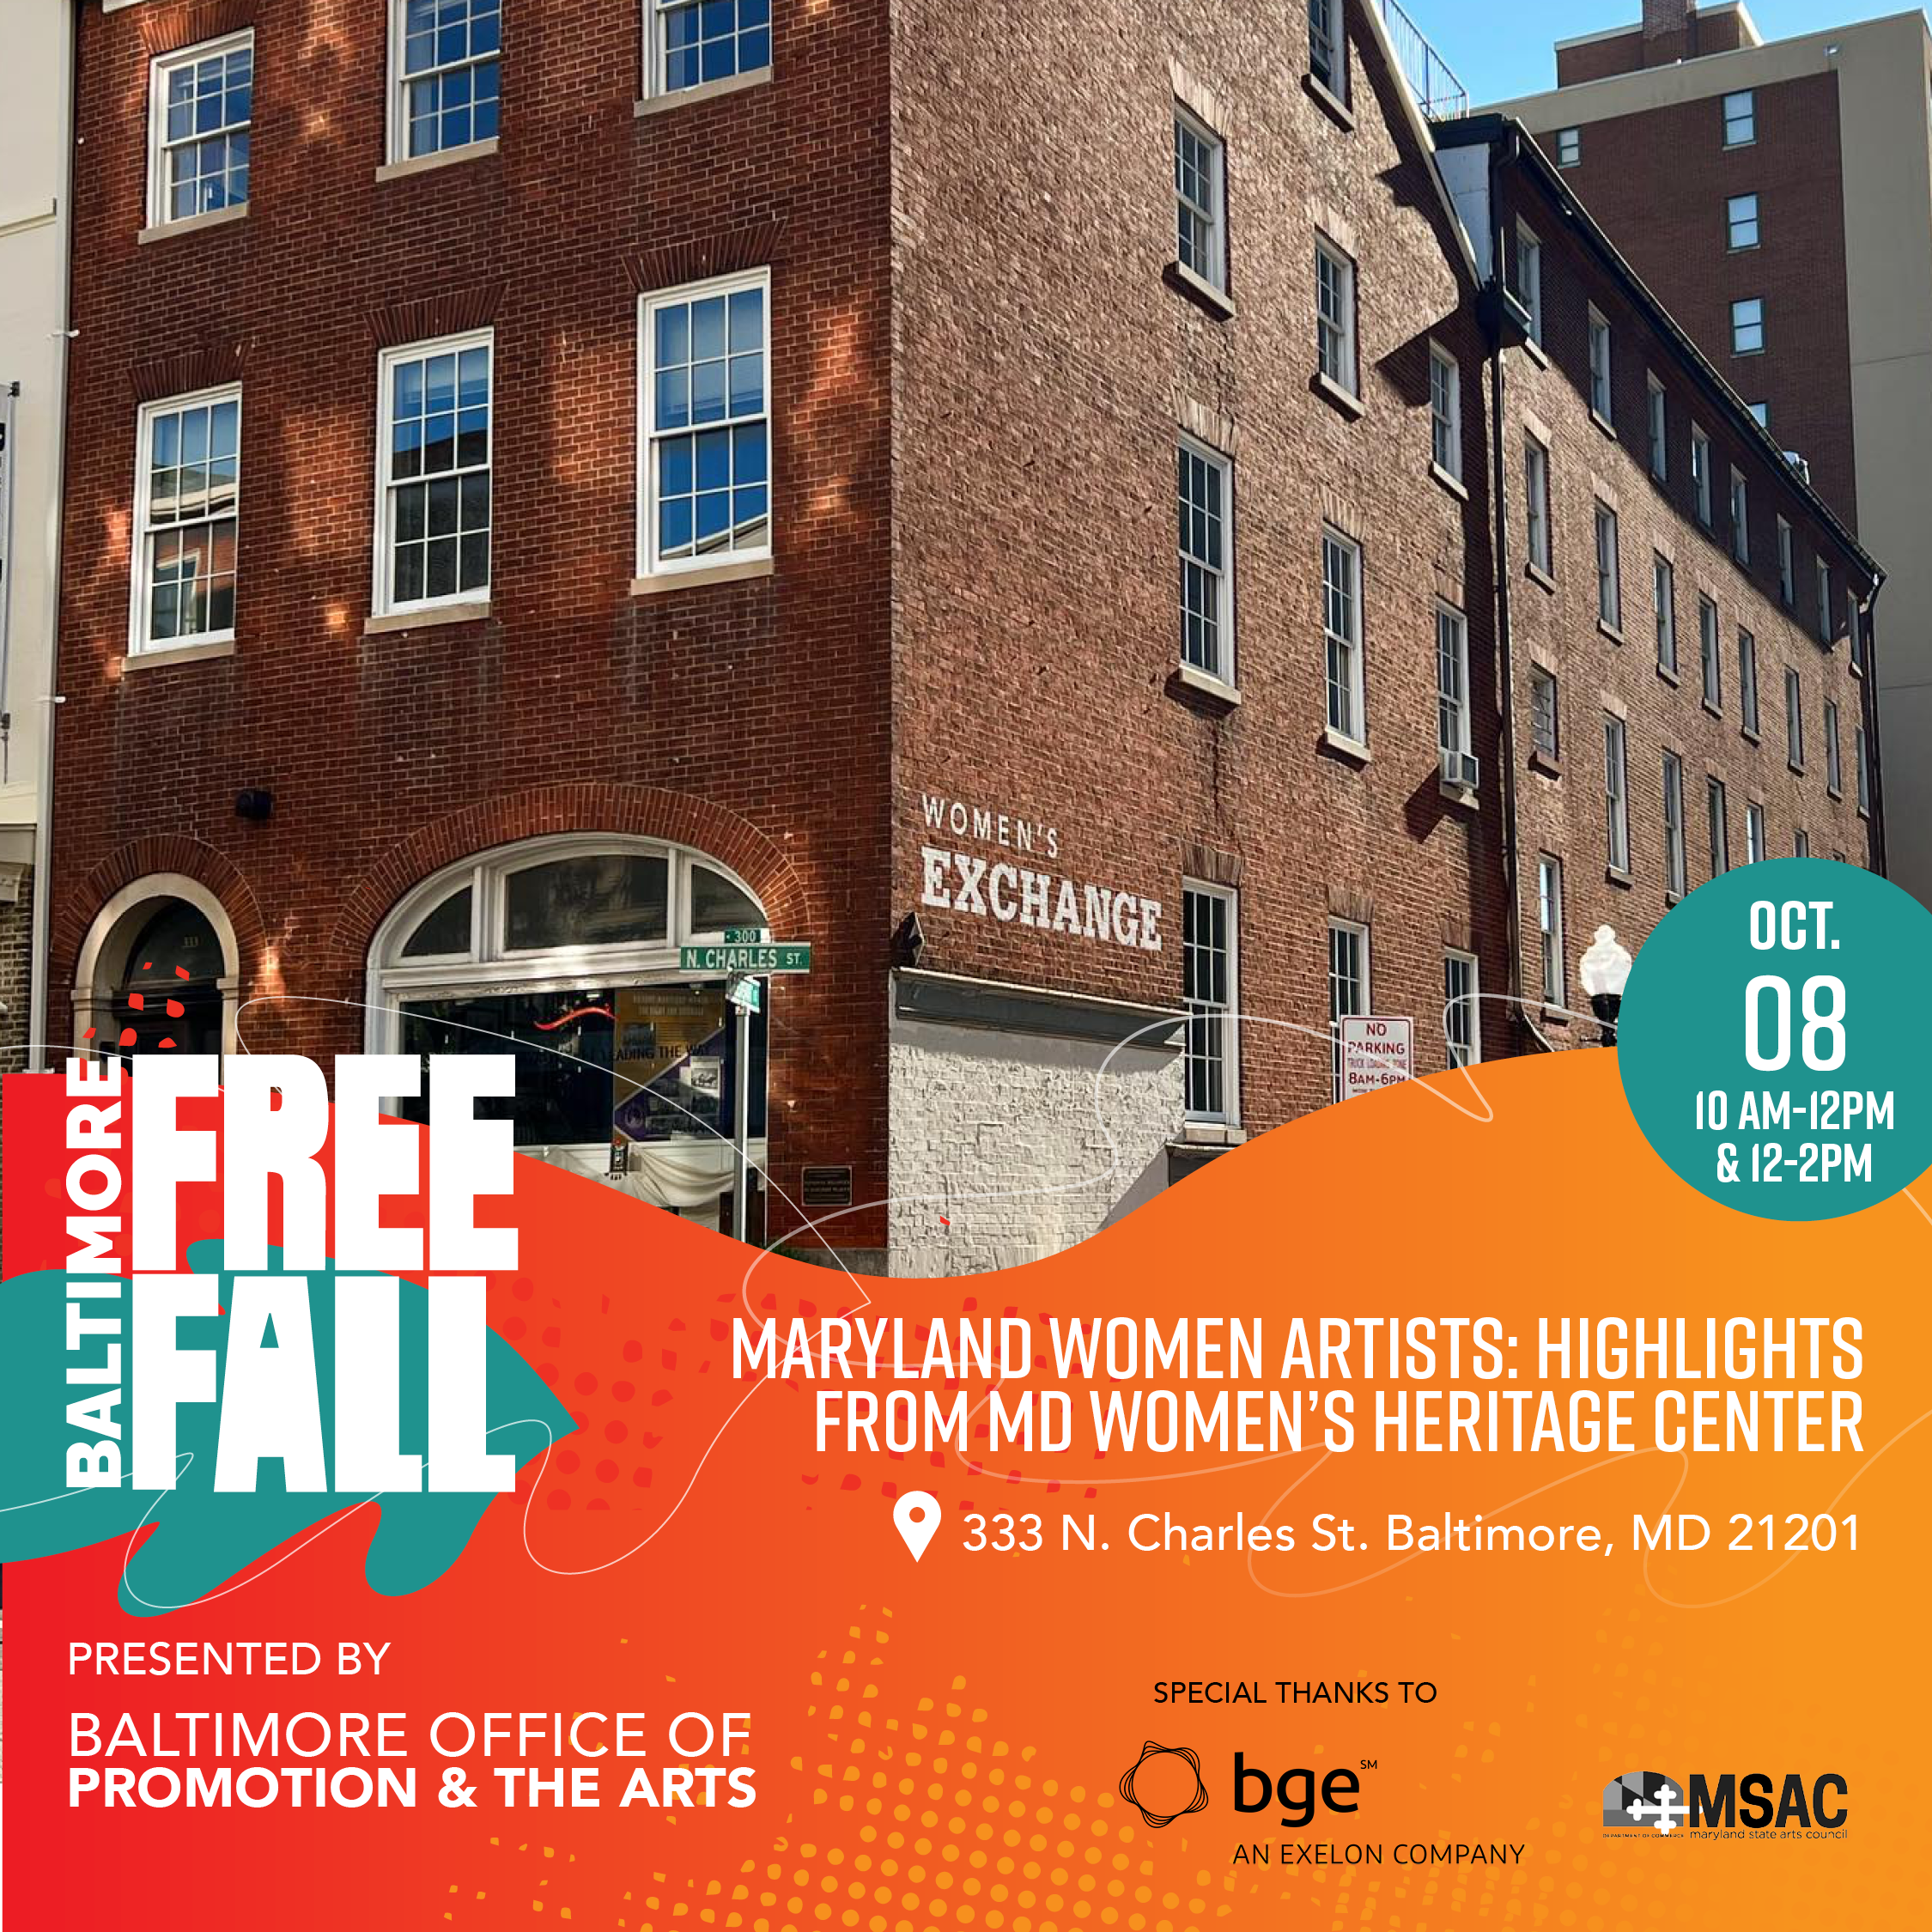 Maryland Women Artists: Highlights from MD Women's Heritage Center at Marian House at the Woman's Industrial Exchange